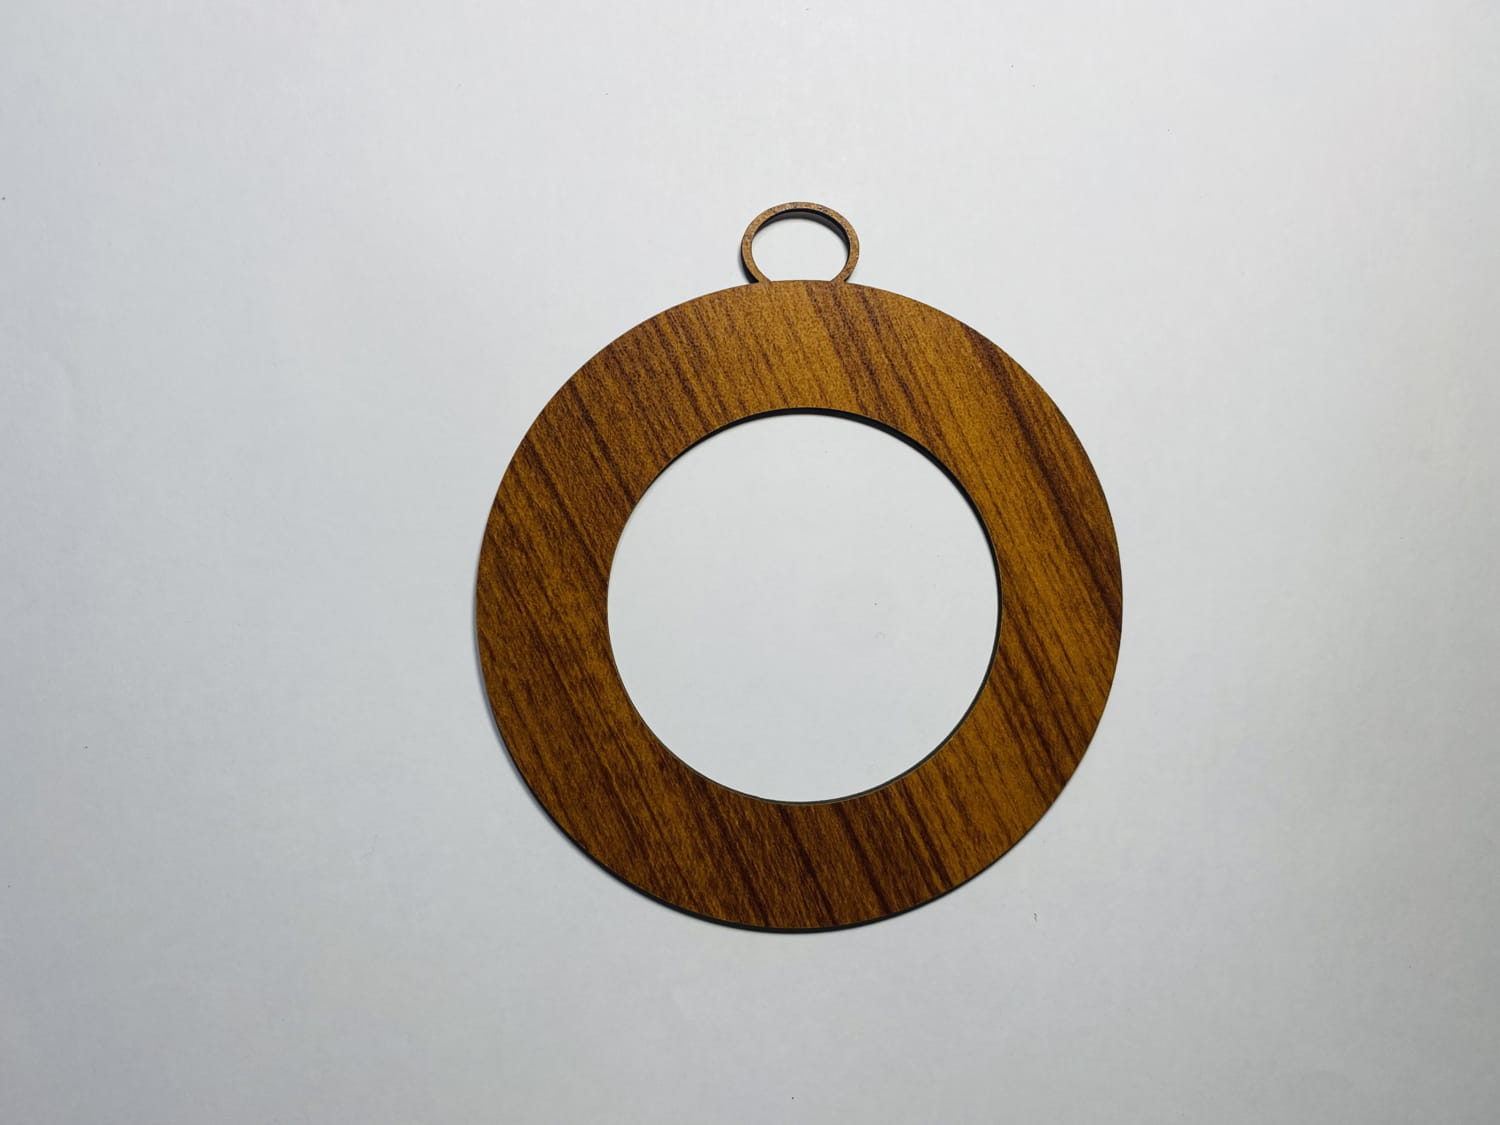 Laser Cut Unfinished Wood Hollow Circle Ornament Free Vector